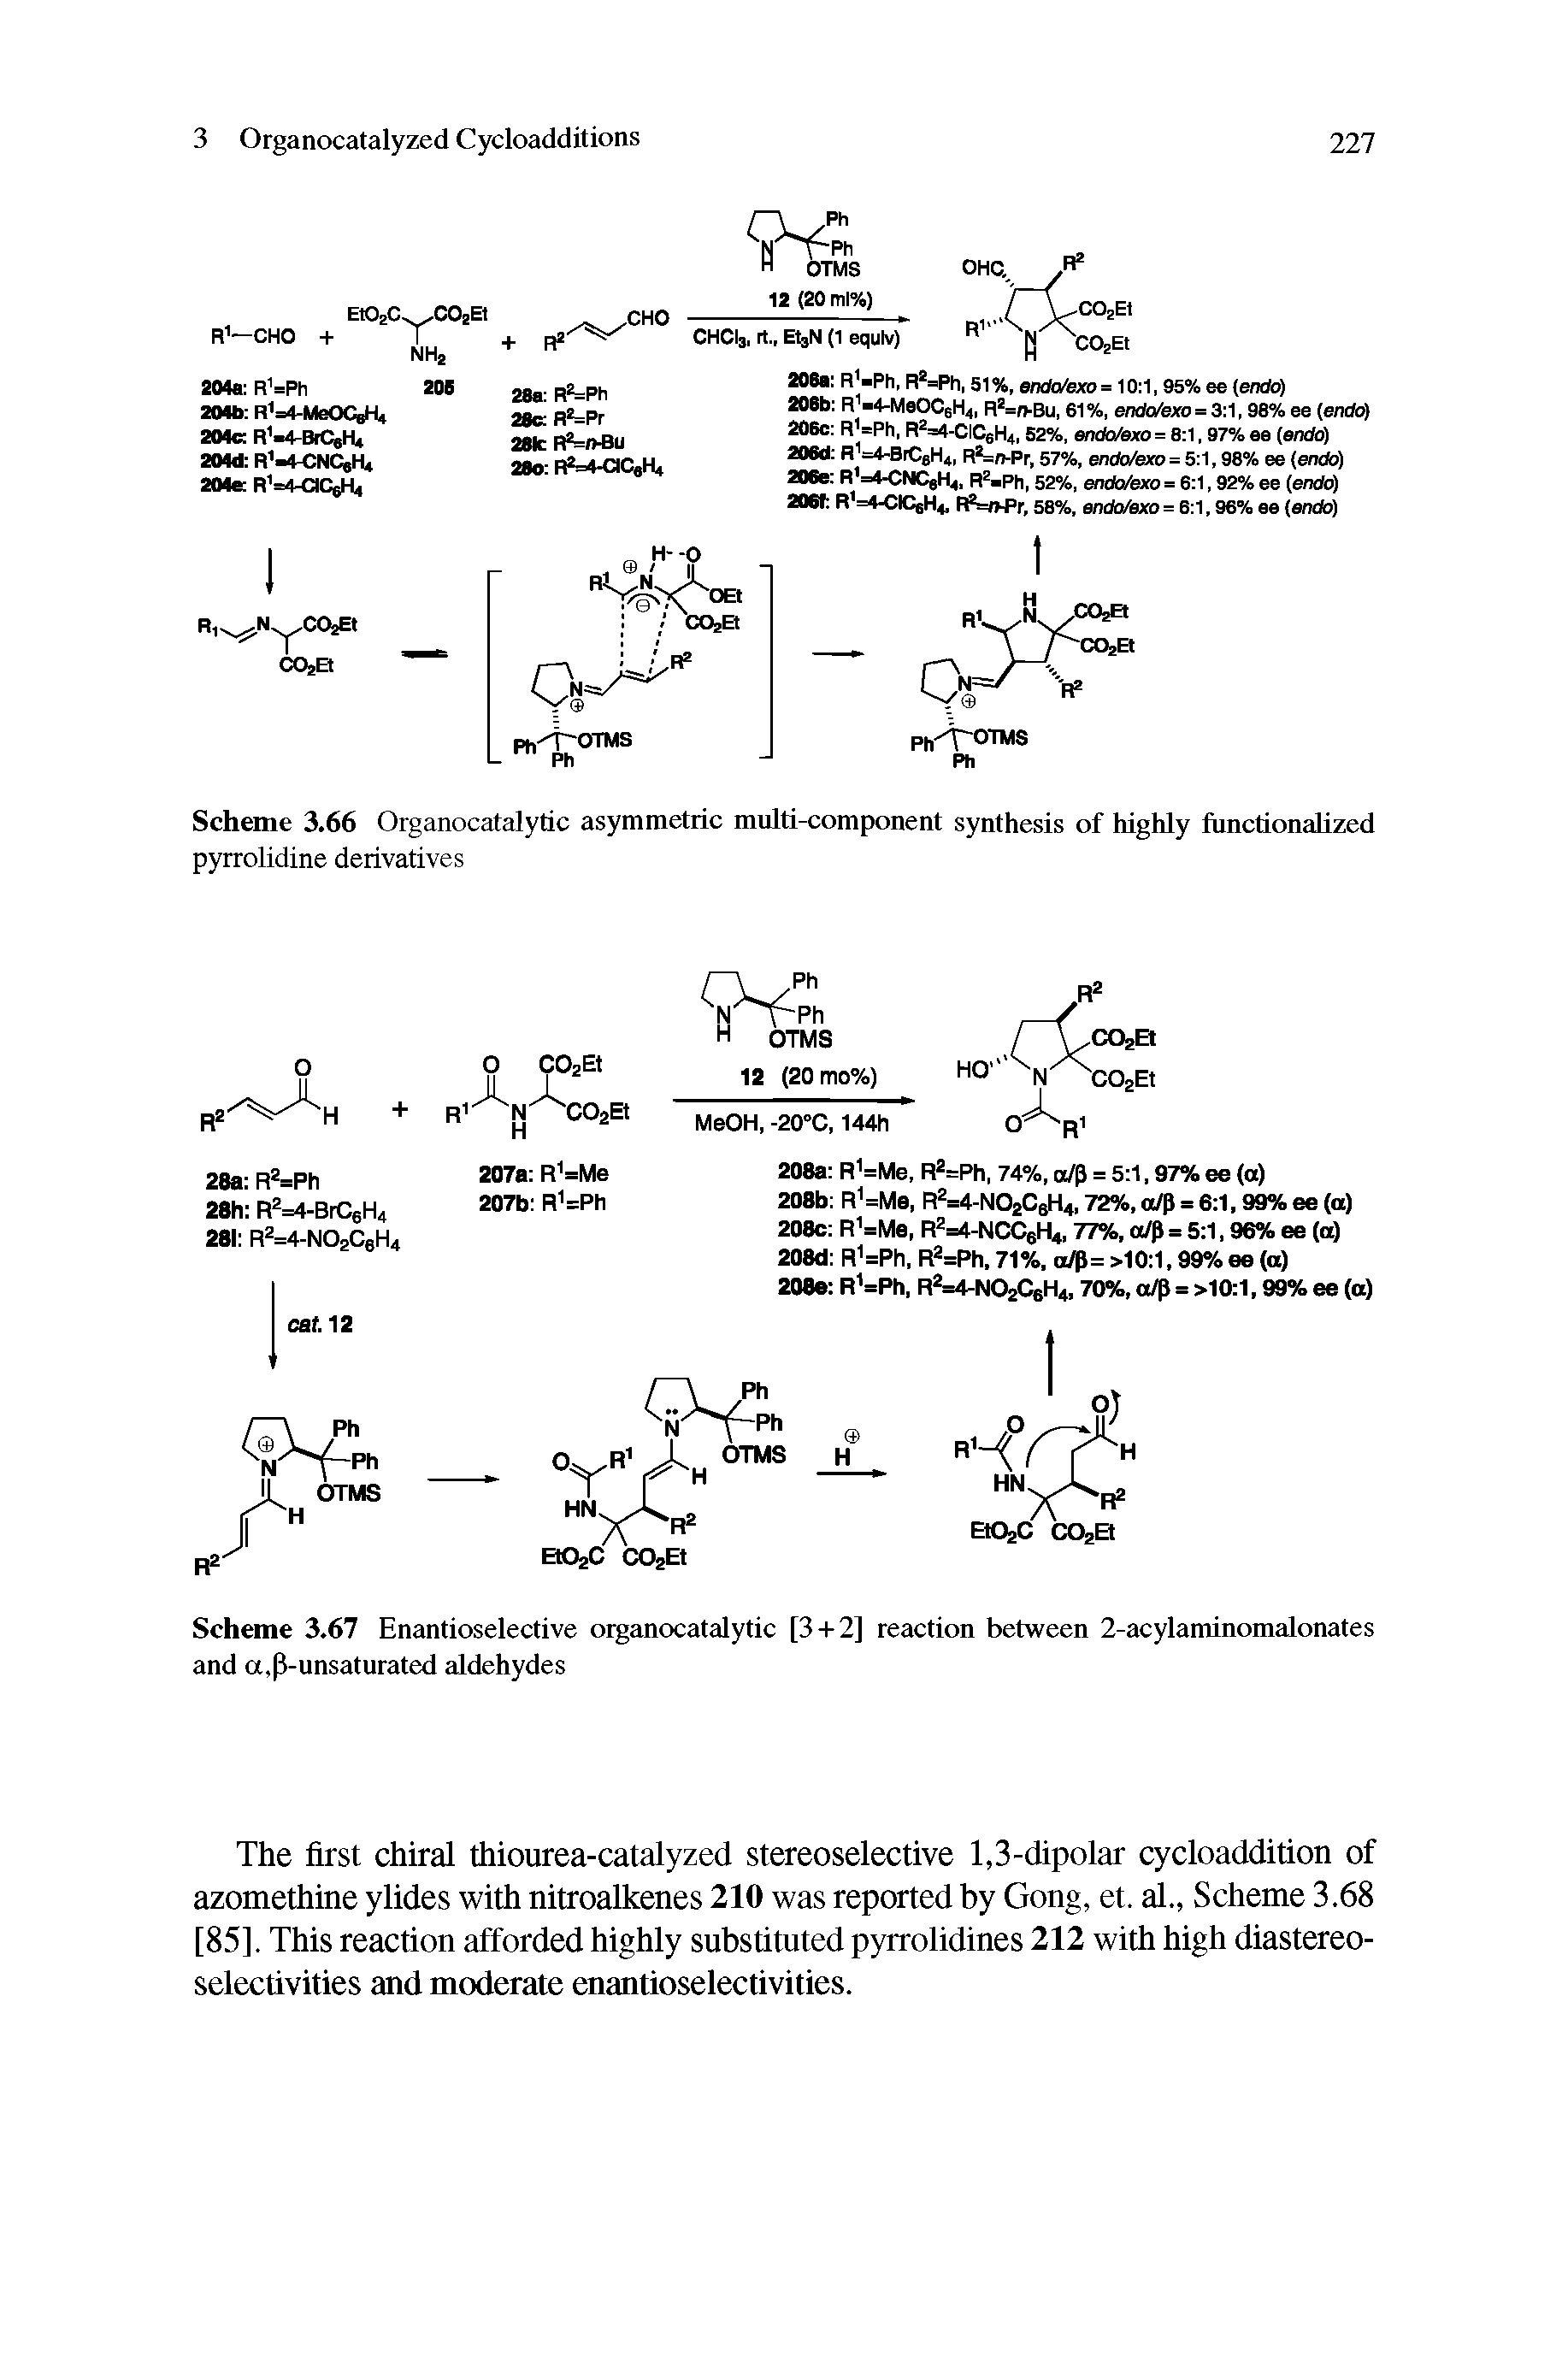 Scheme 3.67 Enantioselective organocatalytic [3+2] reaction between 2-acylaminomalonates and a, 3-unsaturated aldehydes...